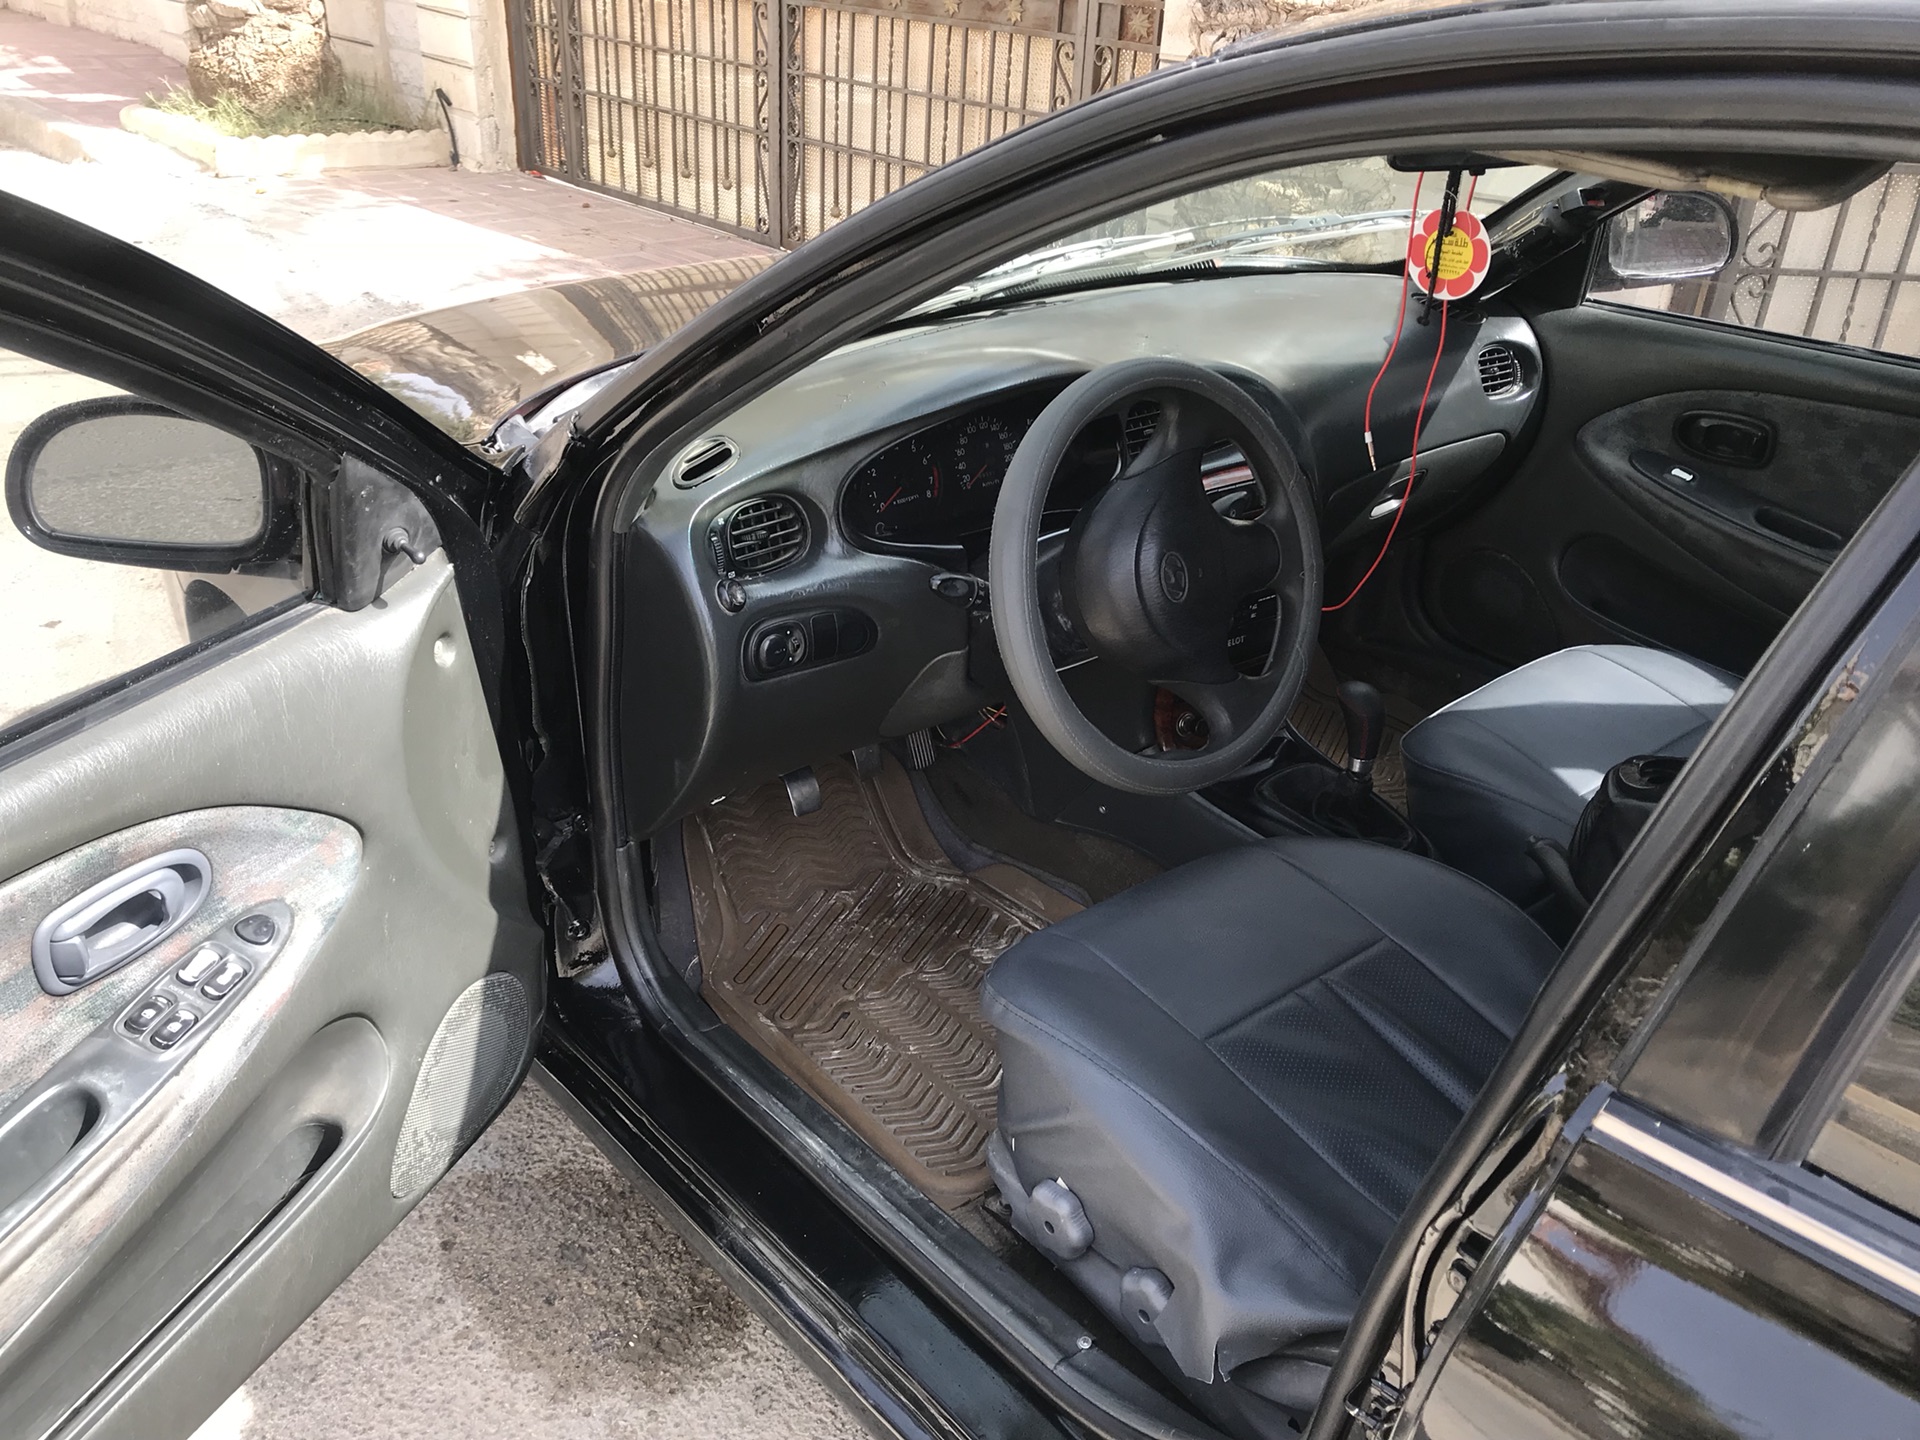 I want to sell my 2018 LEXUS LX 570 for sale at the rate of $20000 because i relocated to another country, the car is in good and excellent condition, contact m-  افانتي قابل للبدل على بطه...